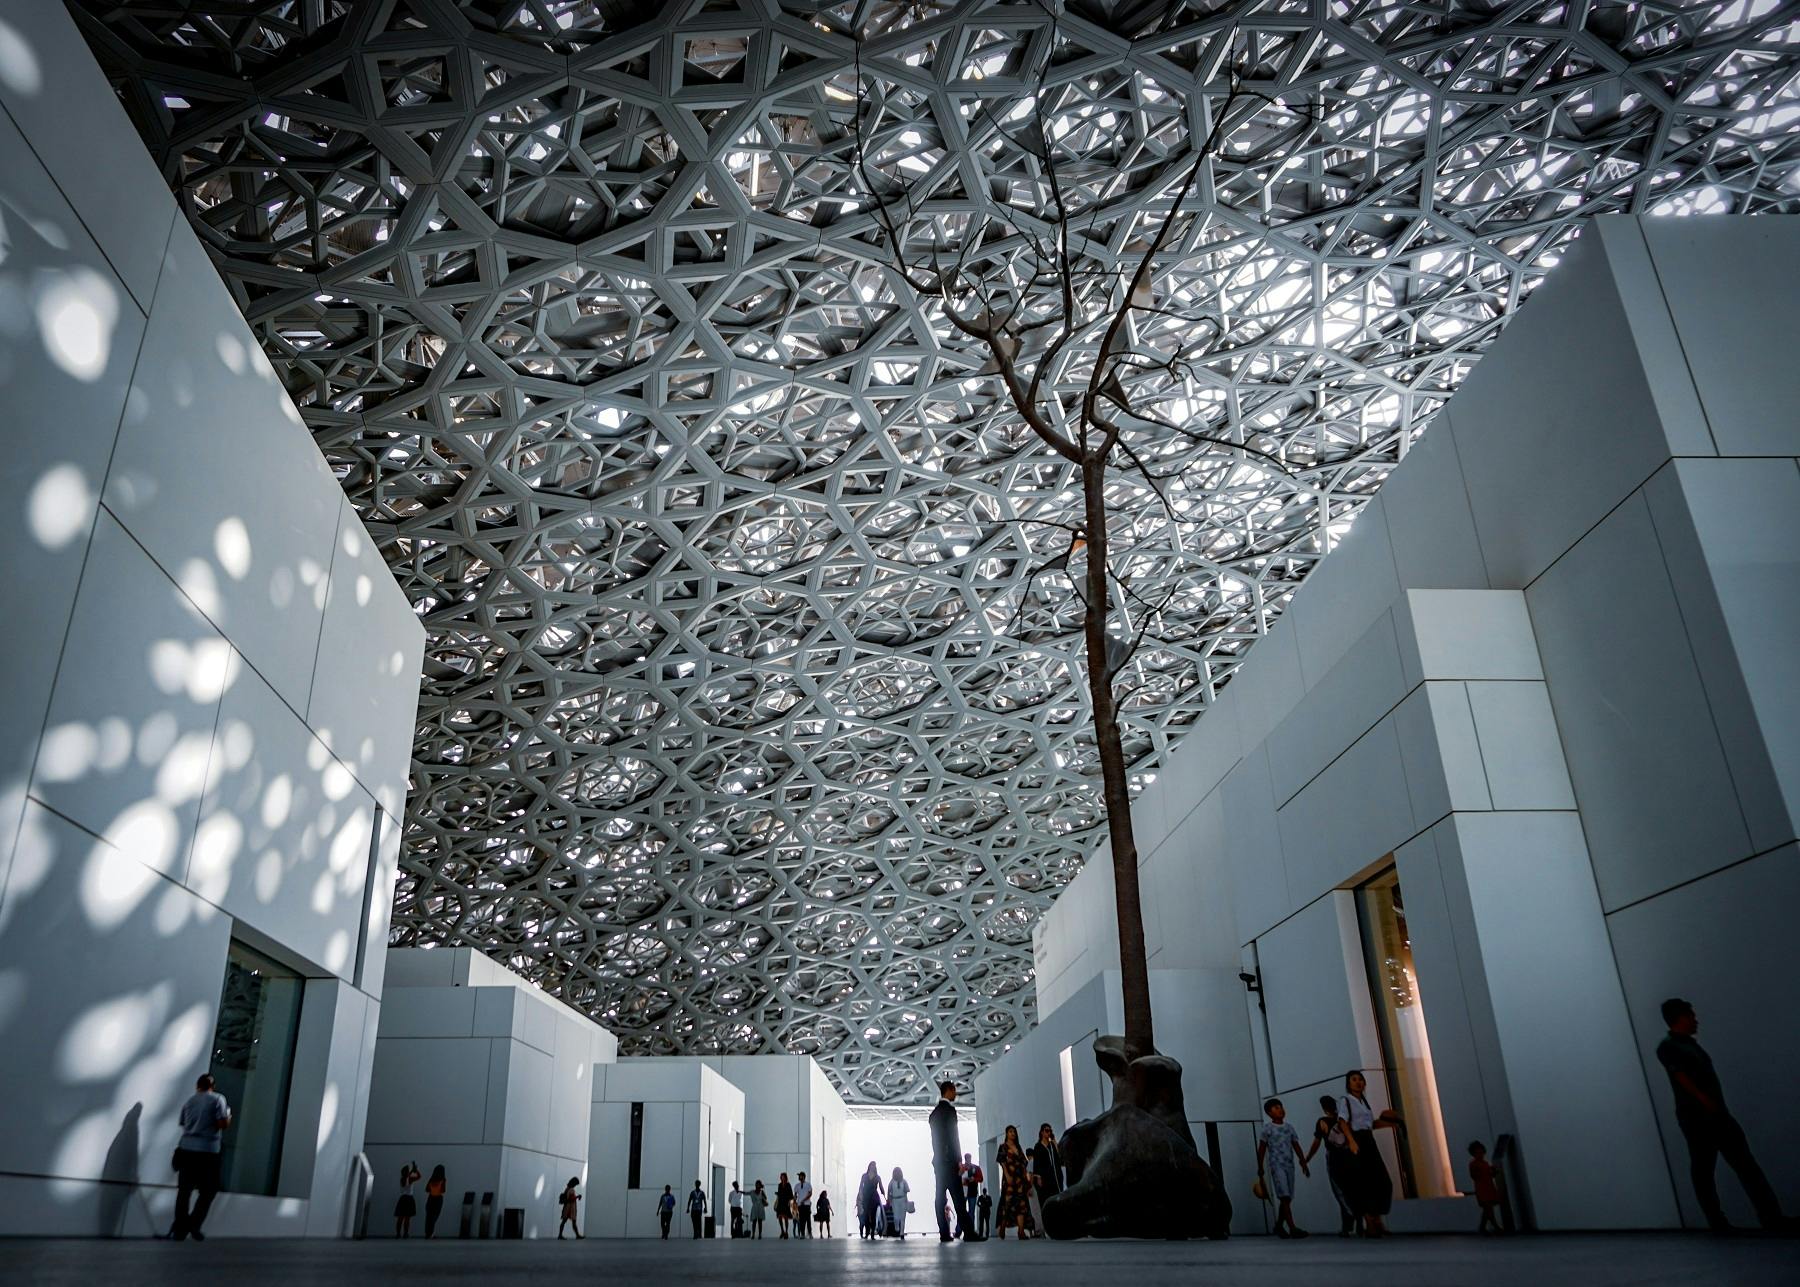 Full day Abu Dhabi tour with Louvre from Musement